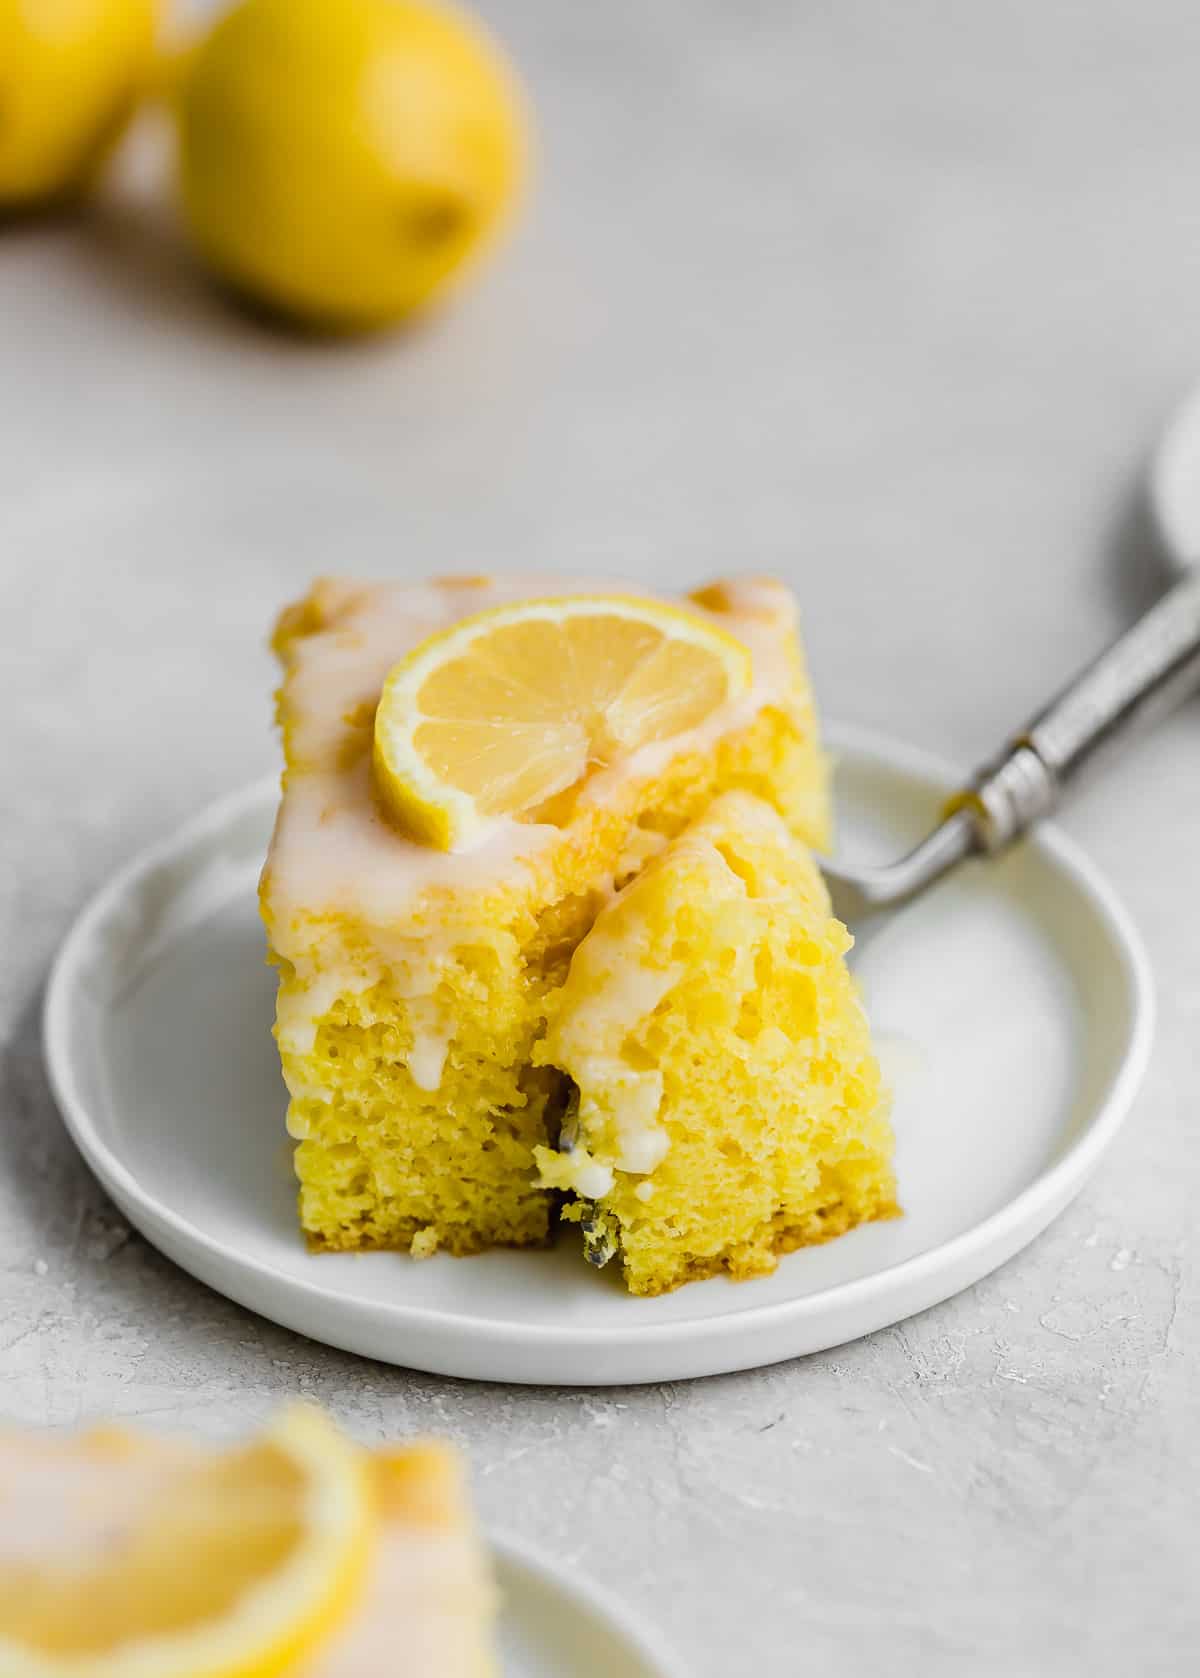 A fork cutting into a square of lemon jello cake on a white plate.